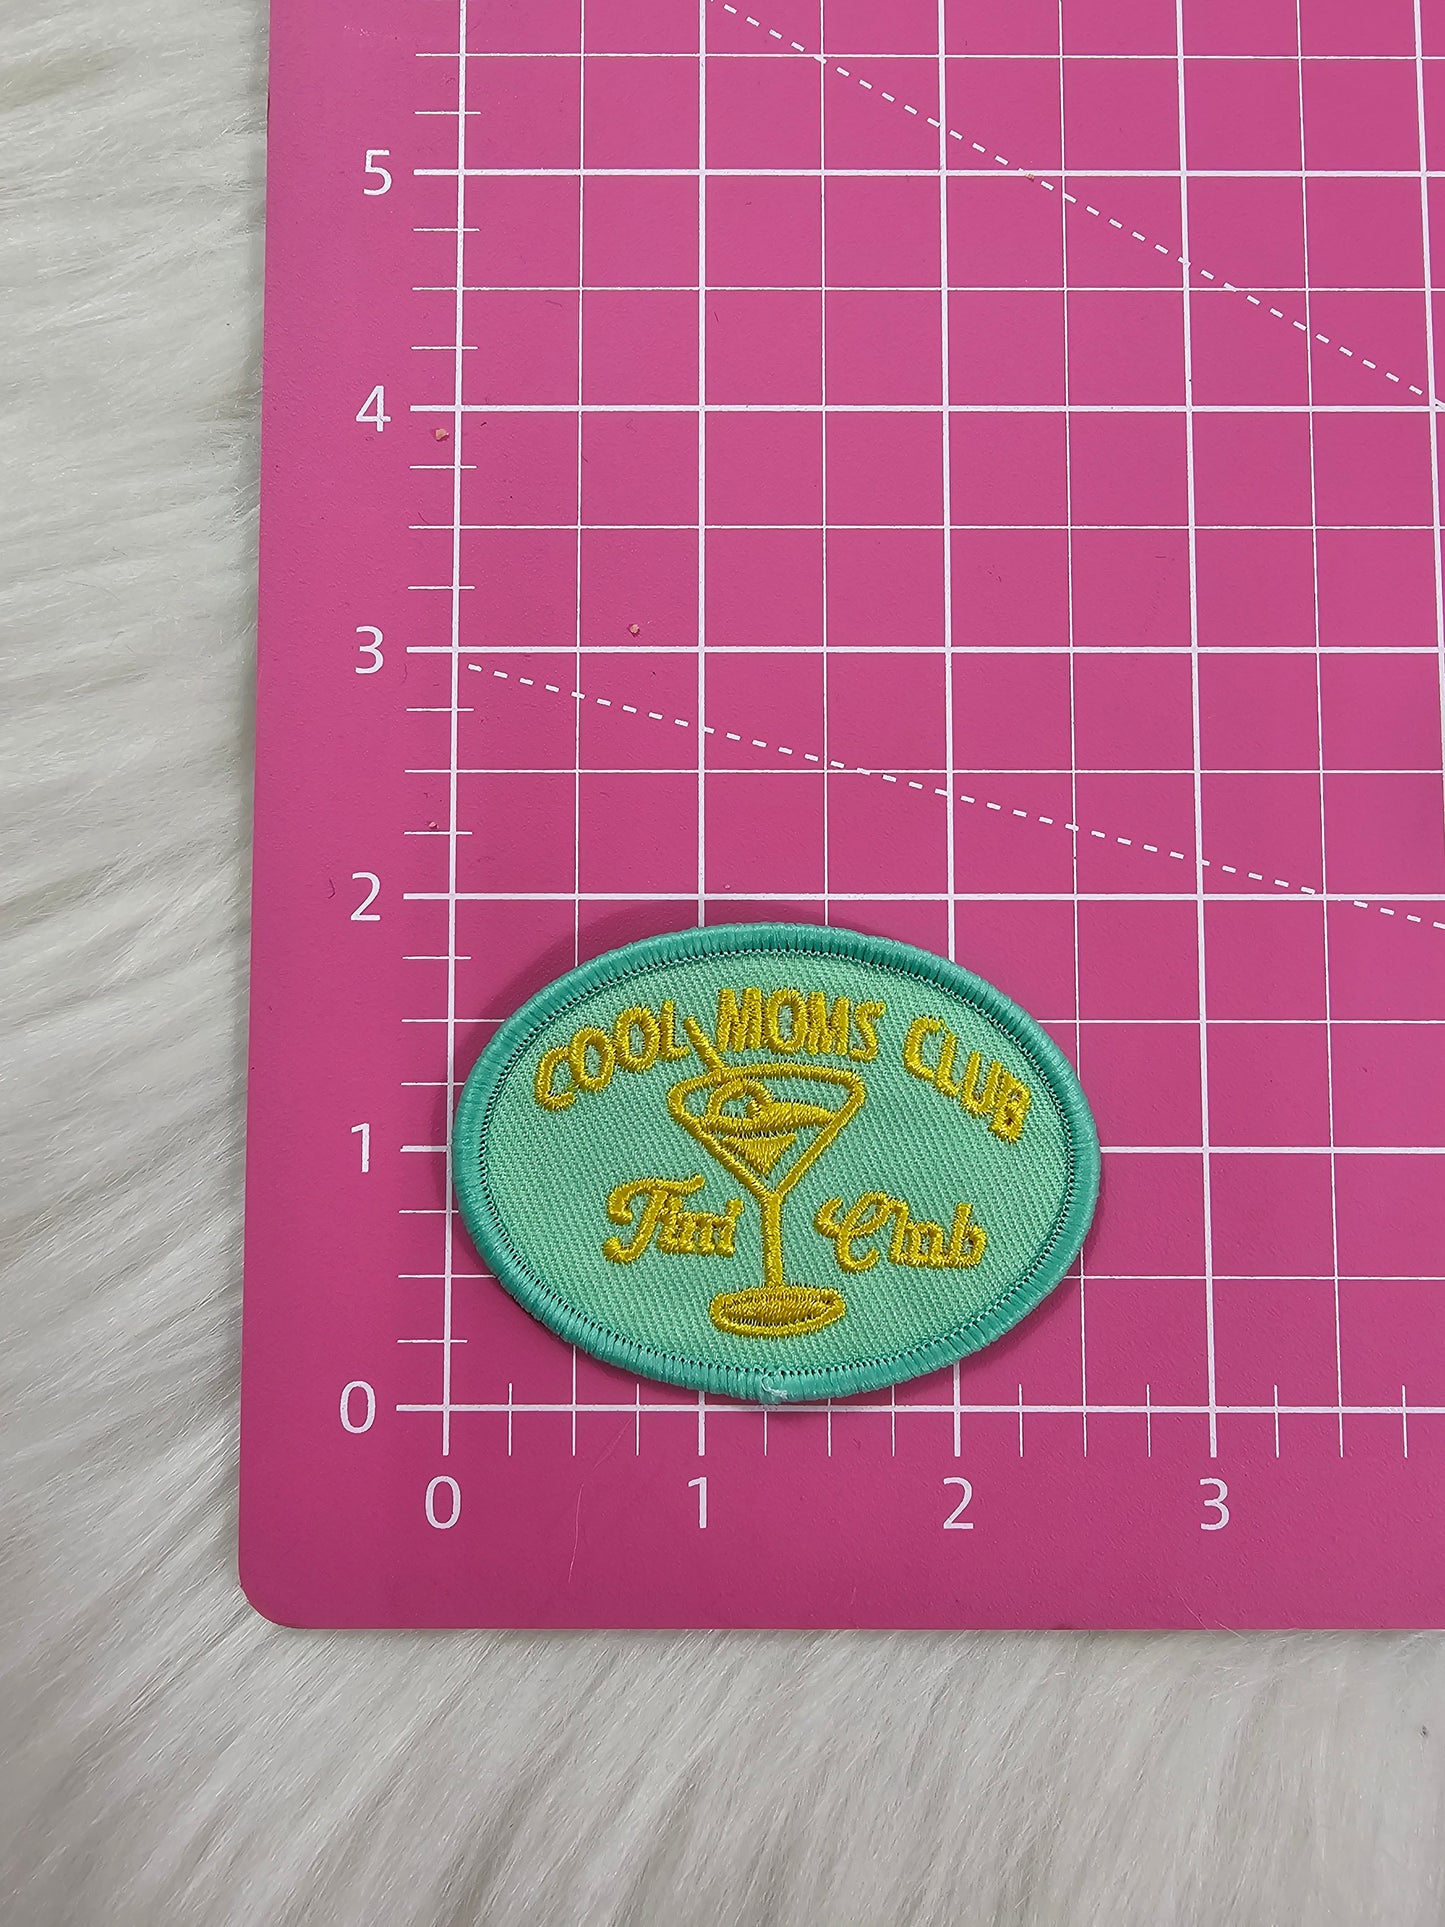 'Cool Moms Tini Club' Embroidery Iron On Patch